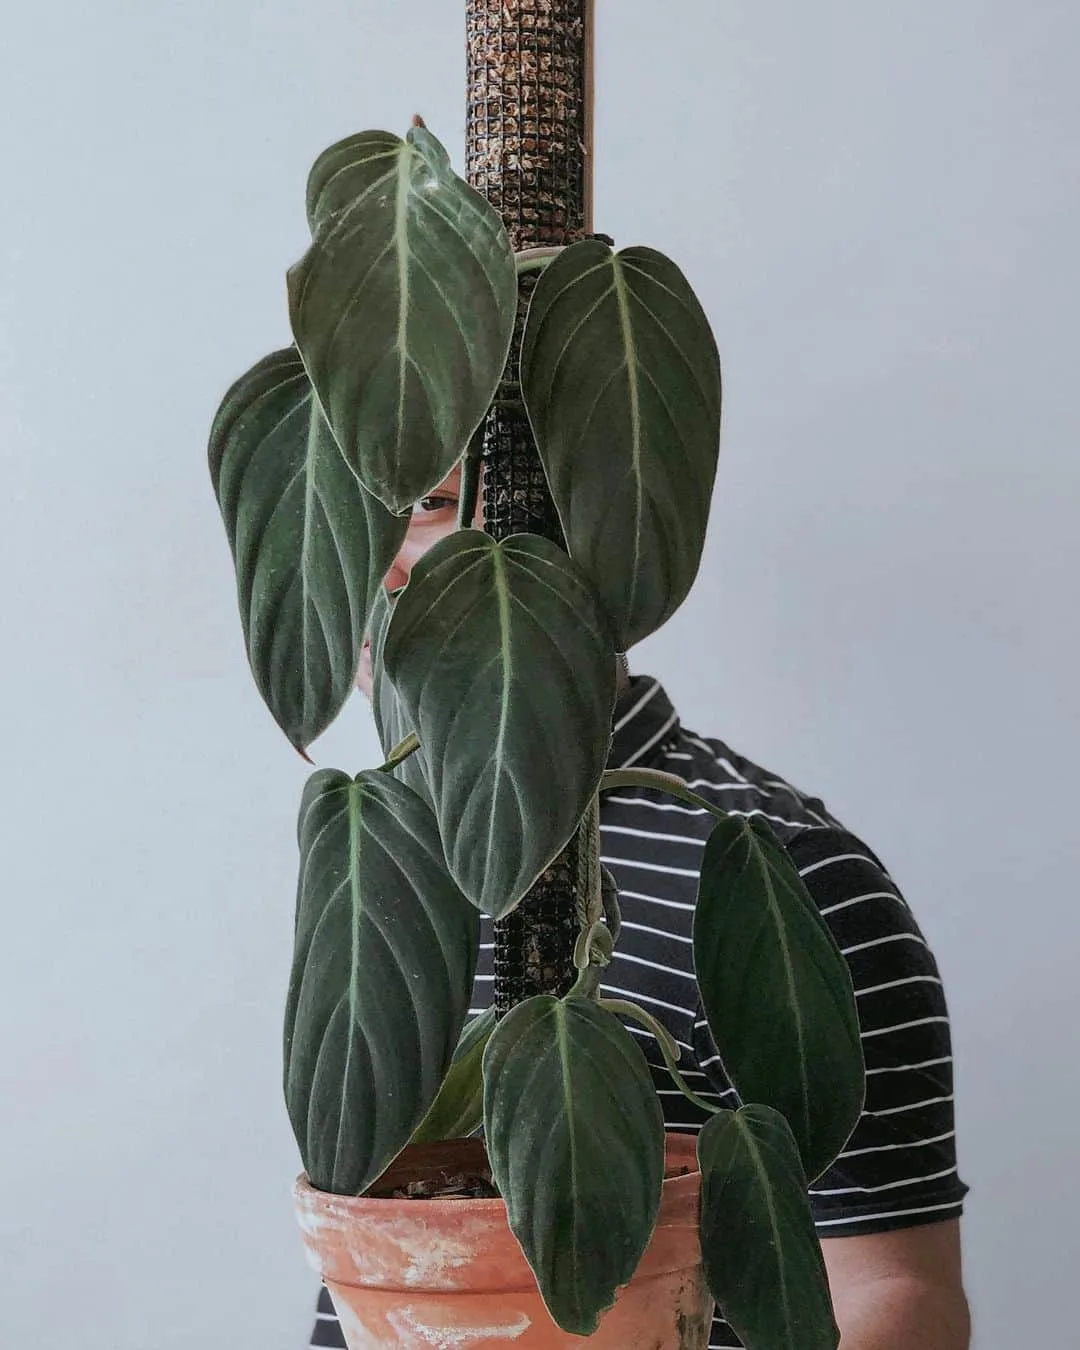 man holding a philodendron gigas plant